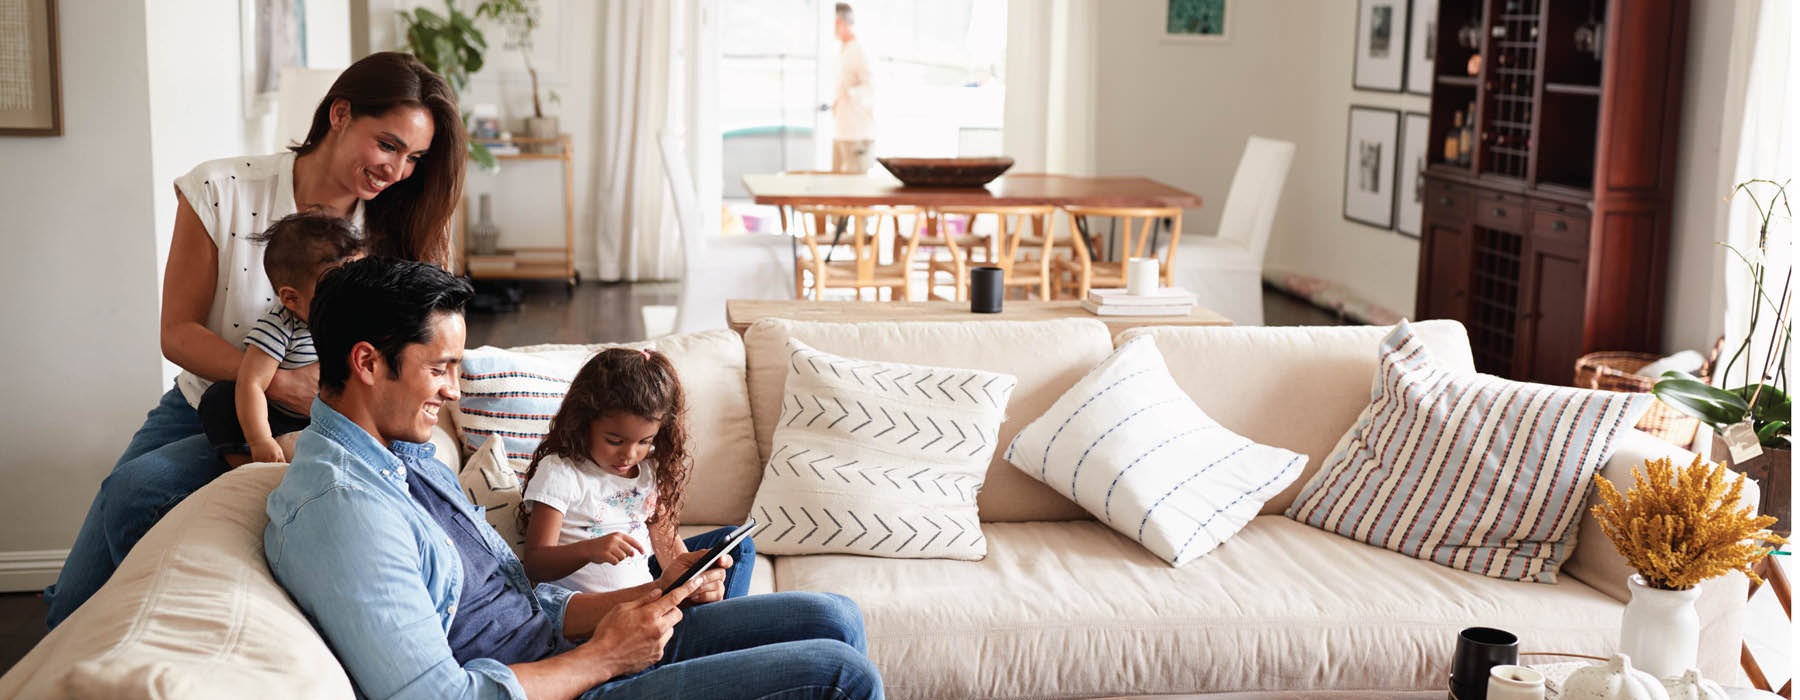 young children sit on a couch with and look at an ipad with their parents